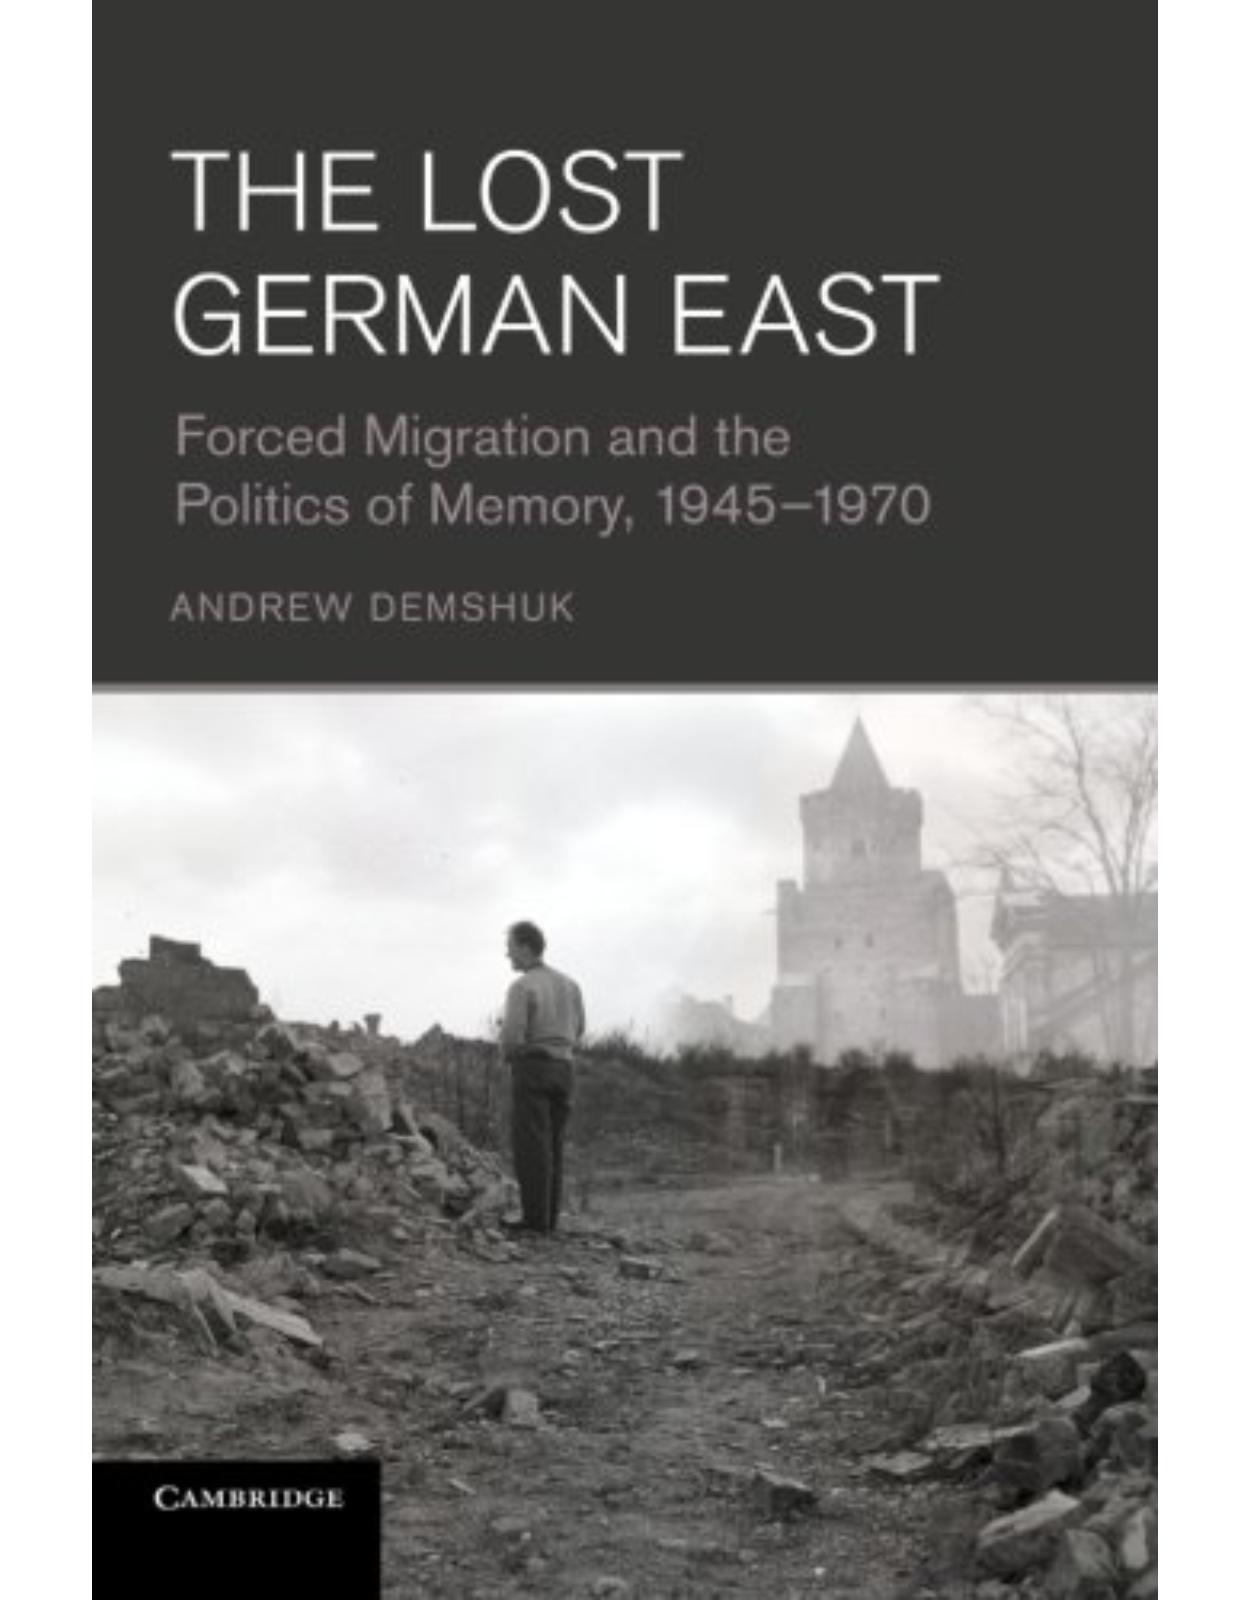 The Lost German East: Forced Migration and the Politics of Memory, 1945-1970